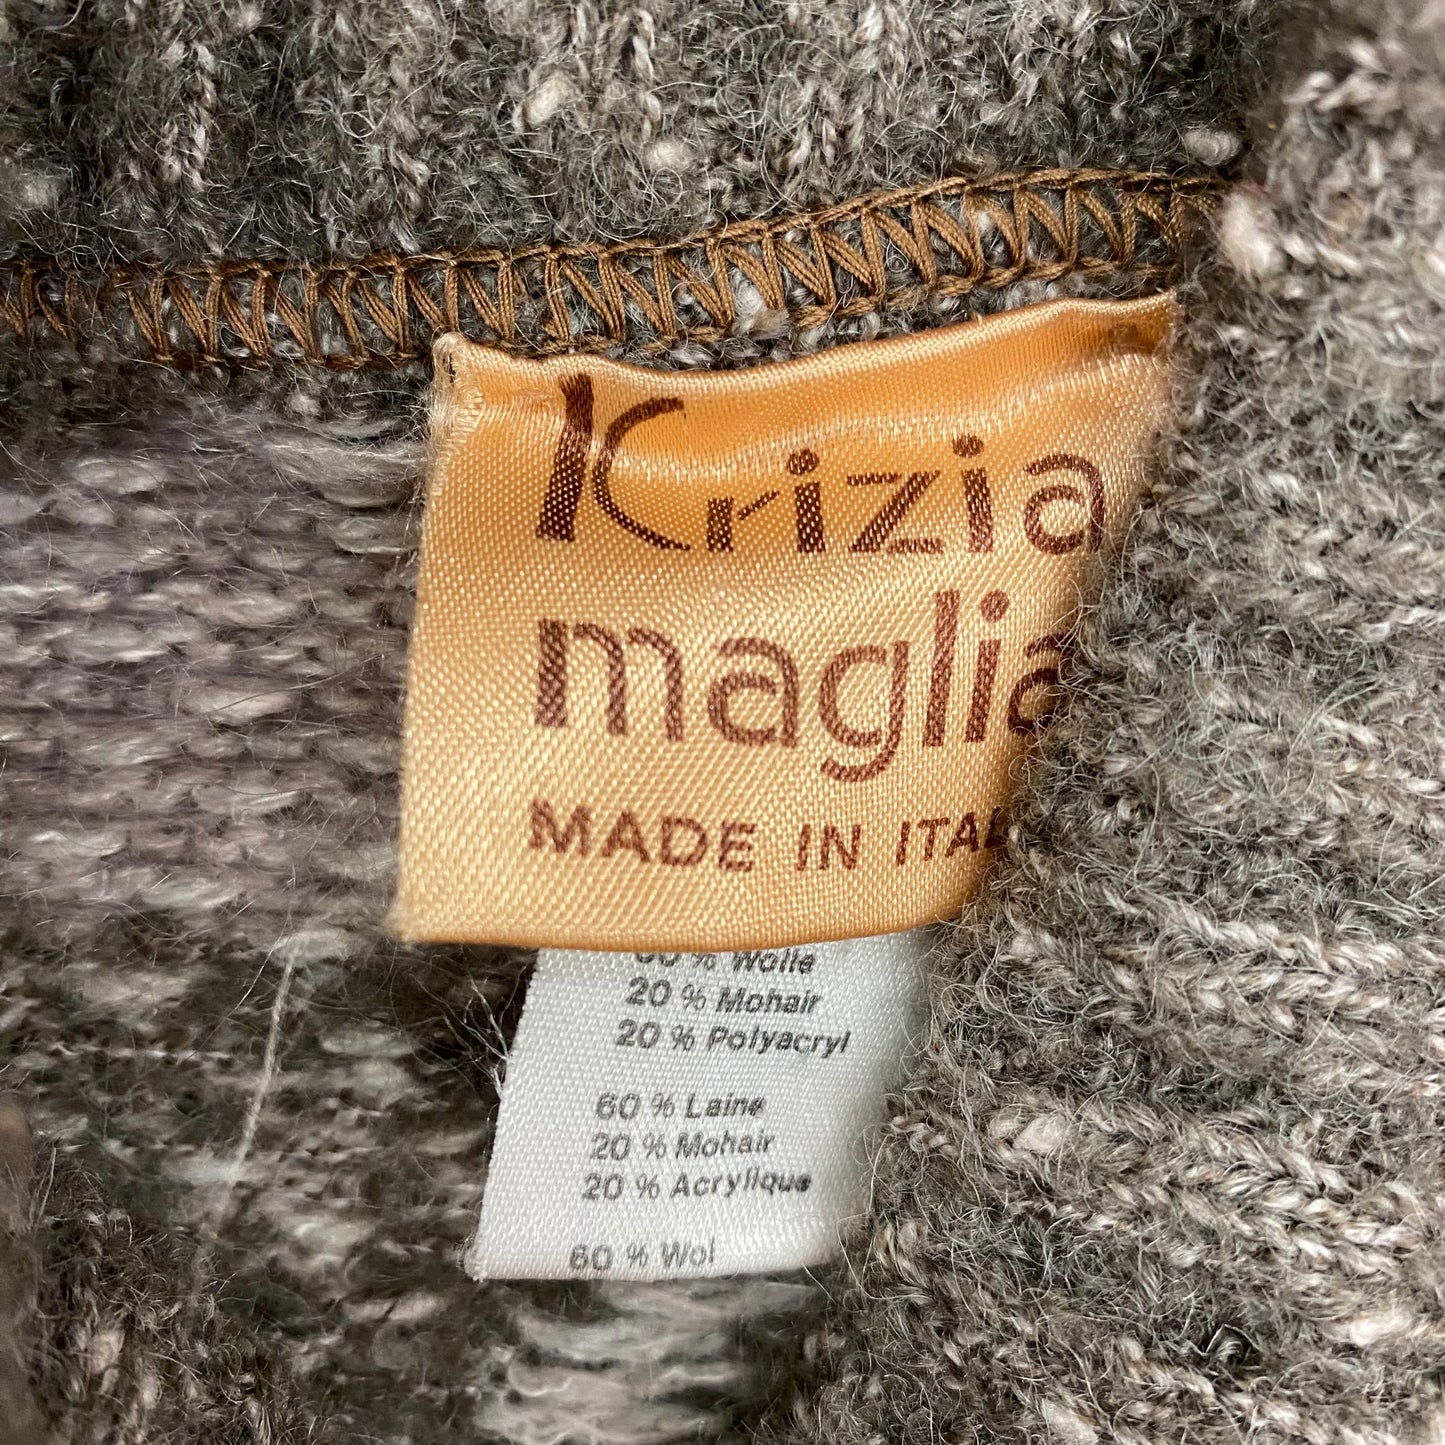 1980s Krizia Maglia Mohair Blend Cardigan Sweater Made in Italy - Size Medium